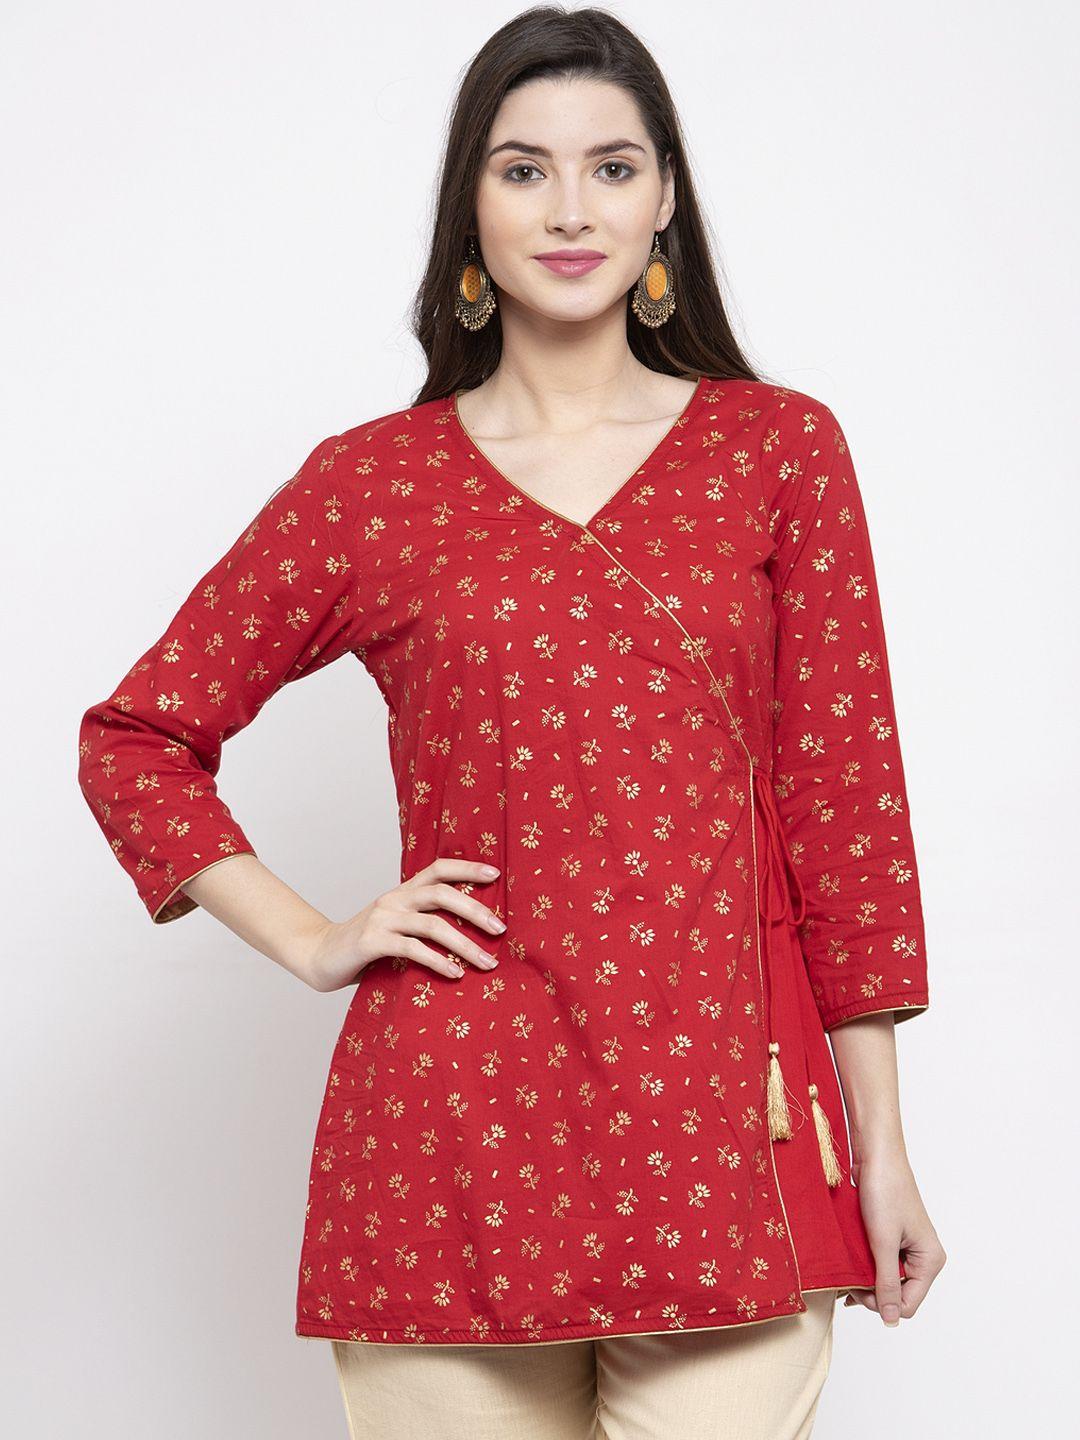 bhama couture women red & golden foil print angrakha tunic